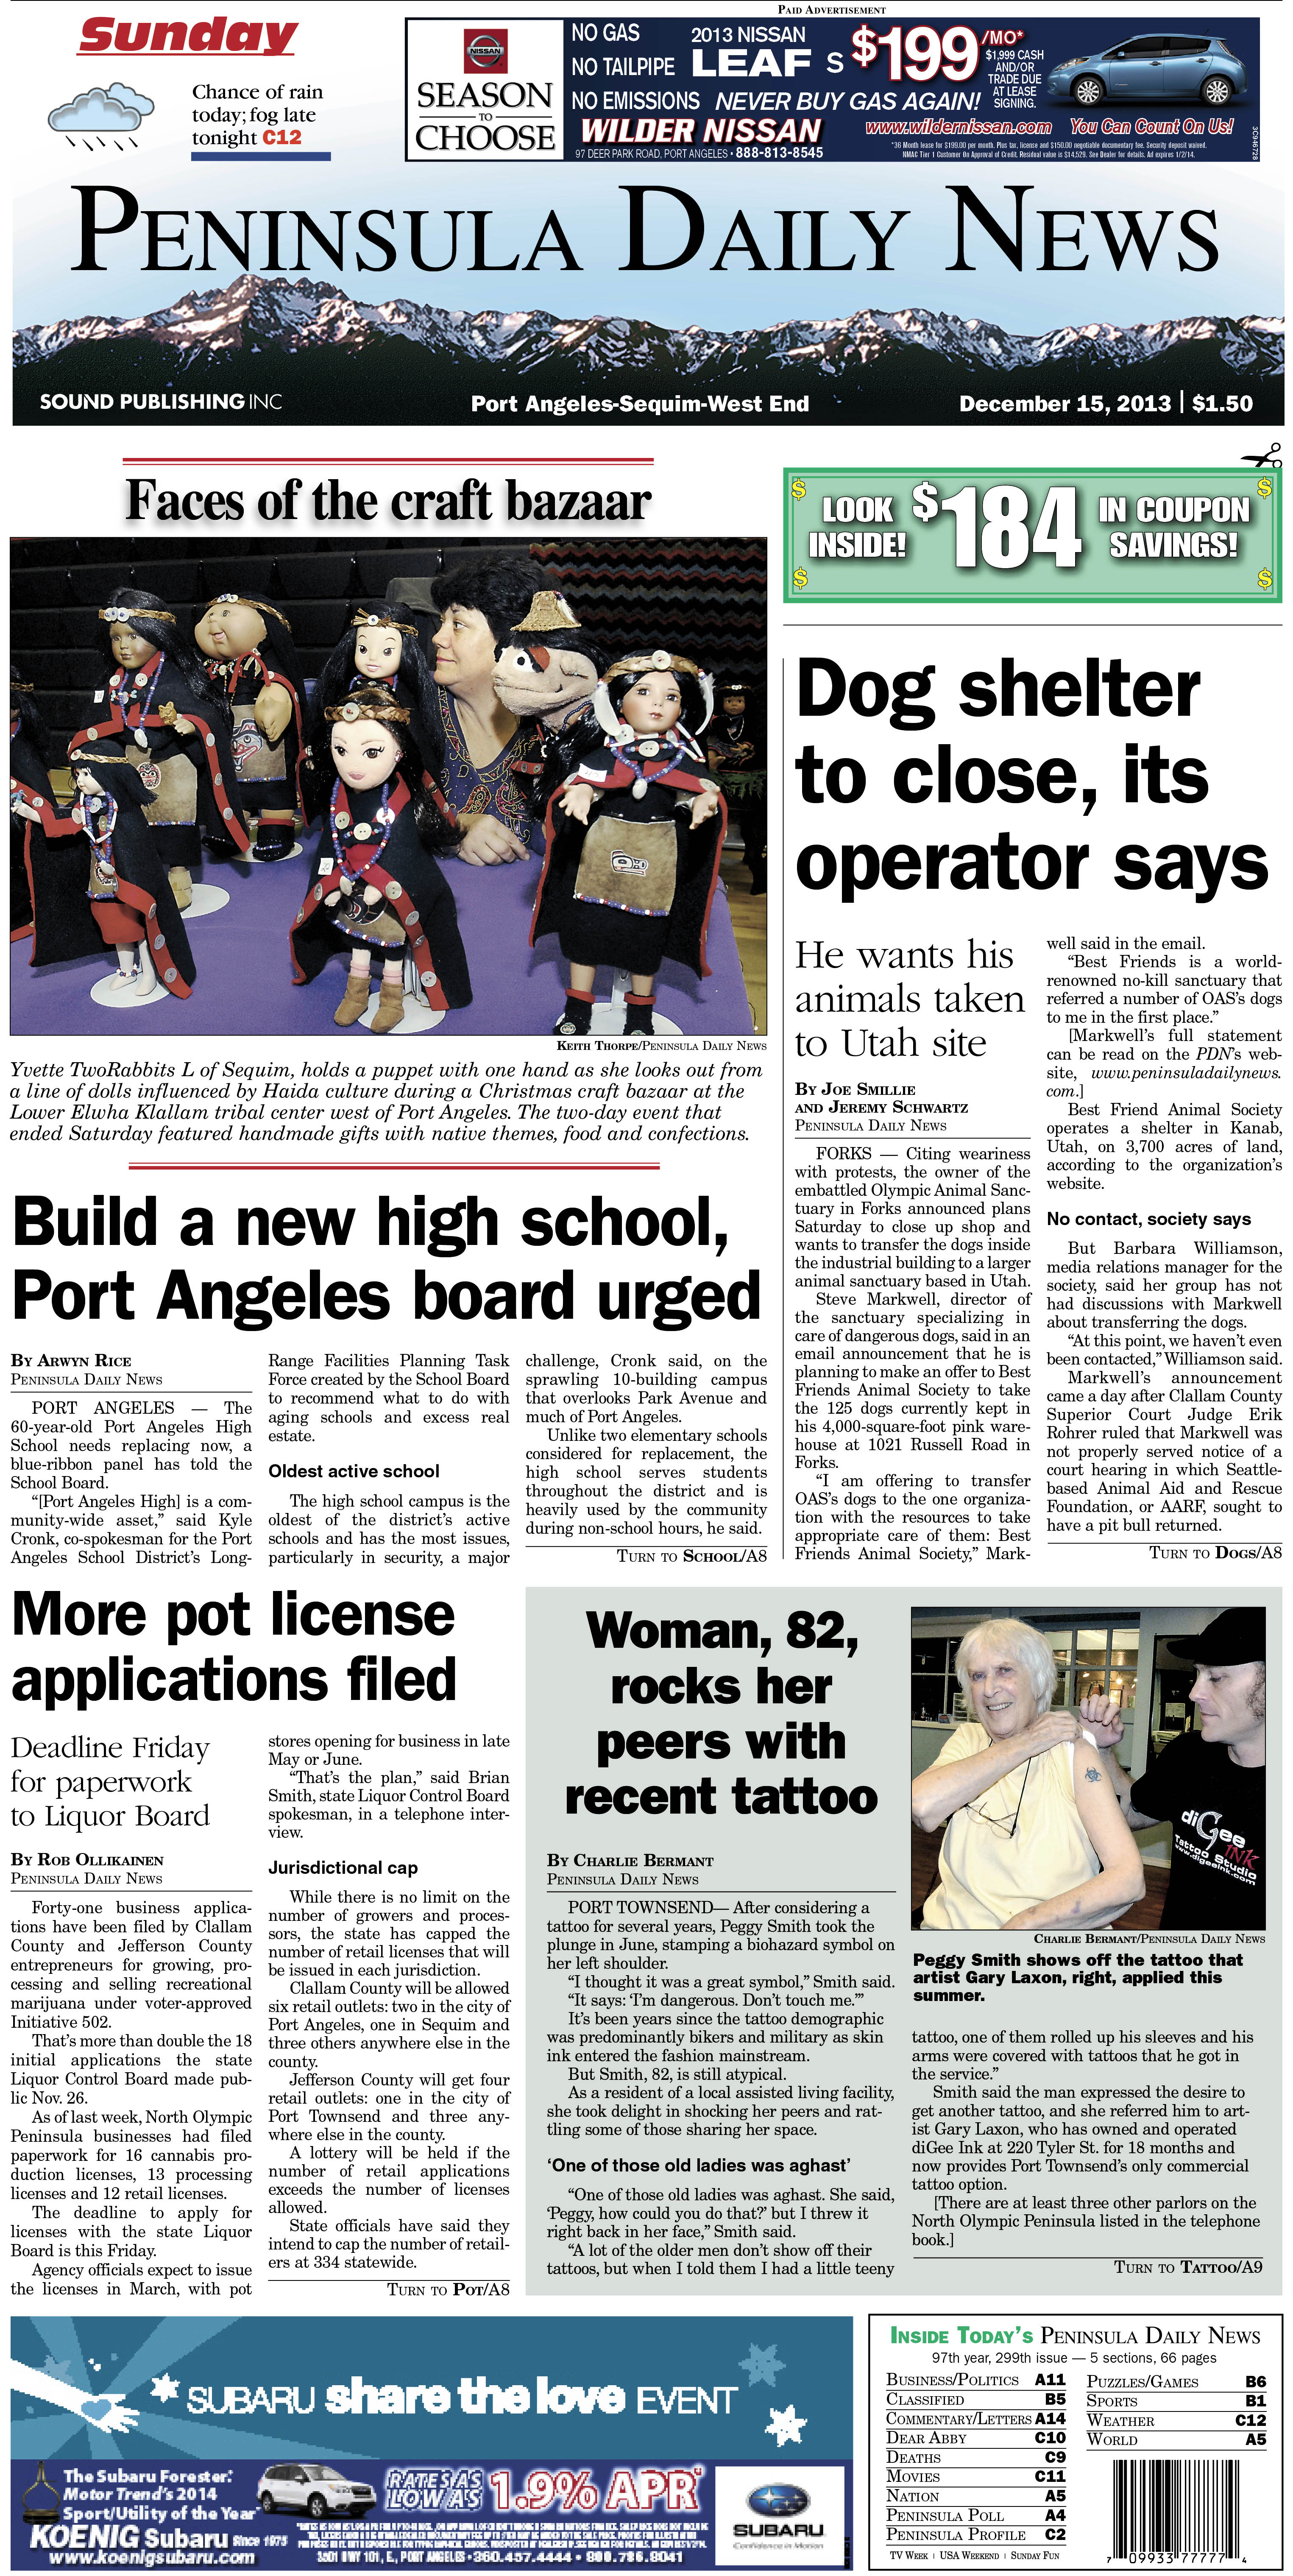 PDN Clallam County edition today.